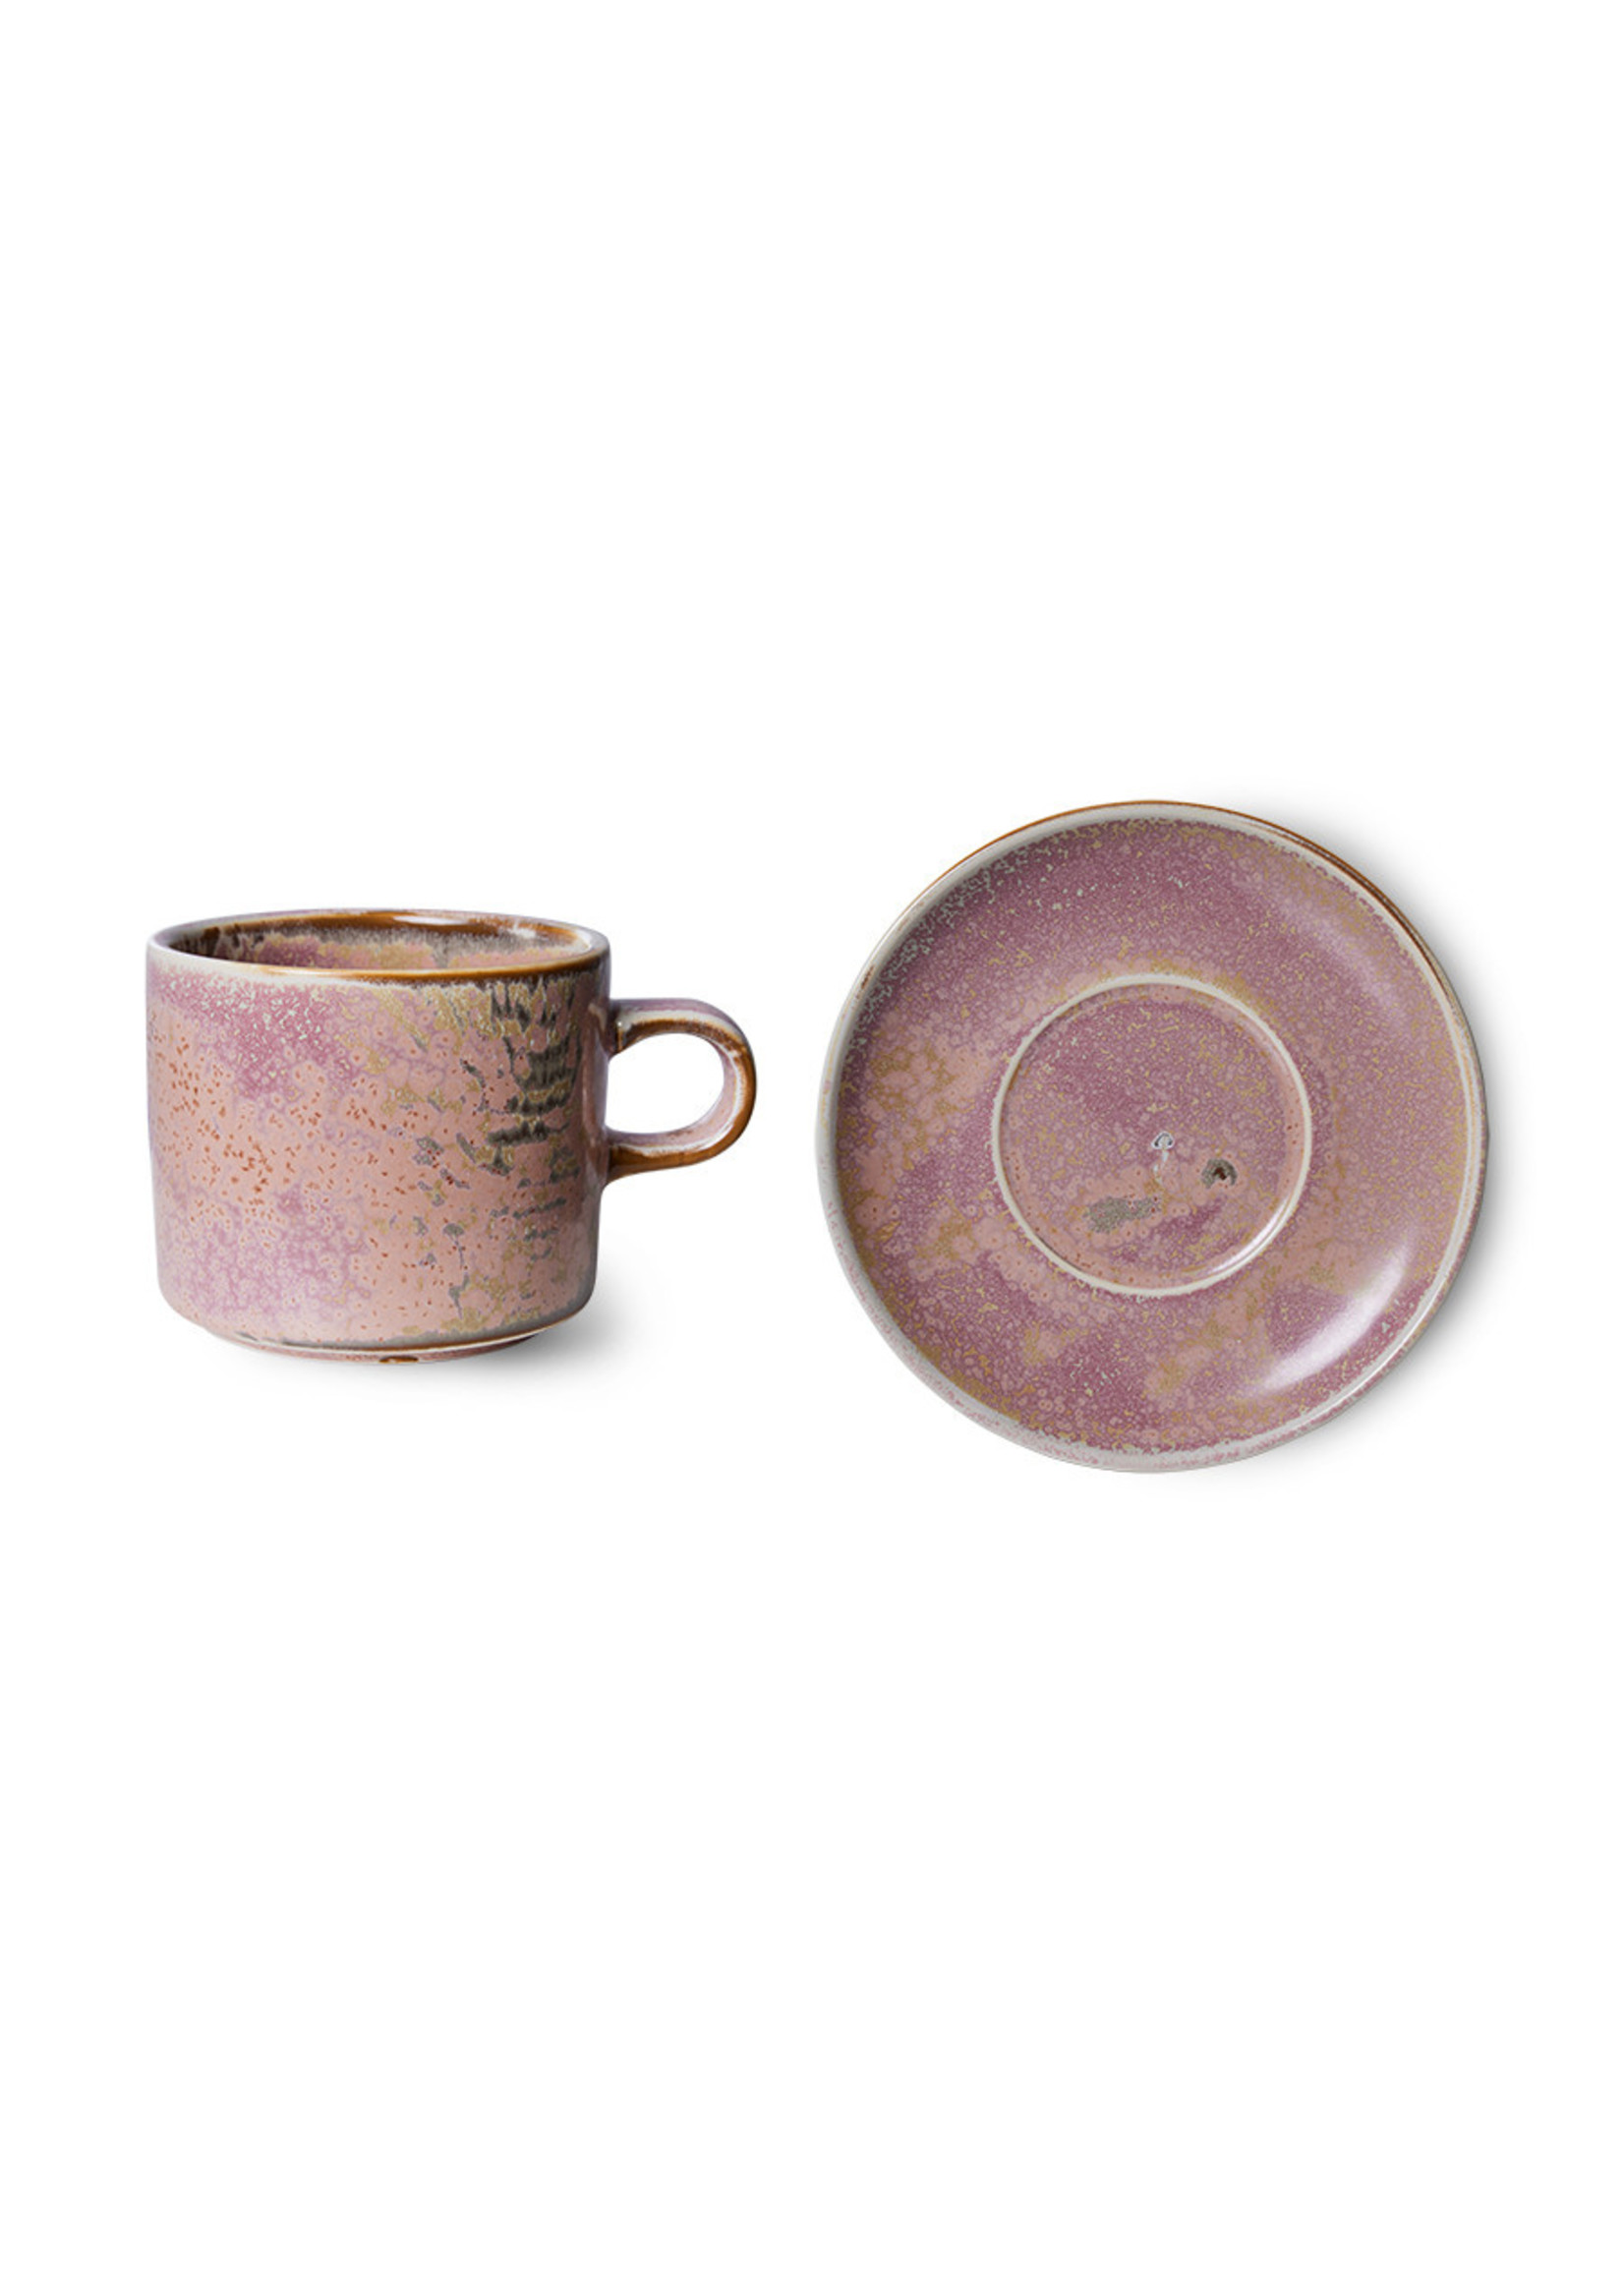 HKliving Chef ceramics: cup and saucer, rustic pink